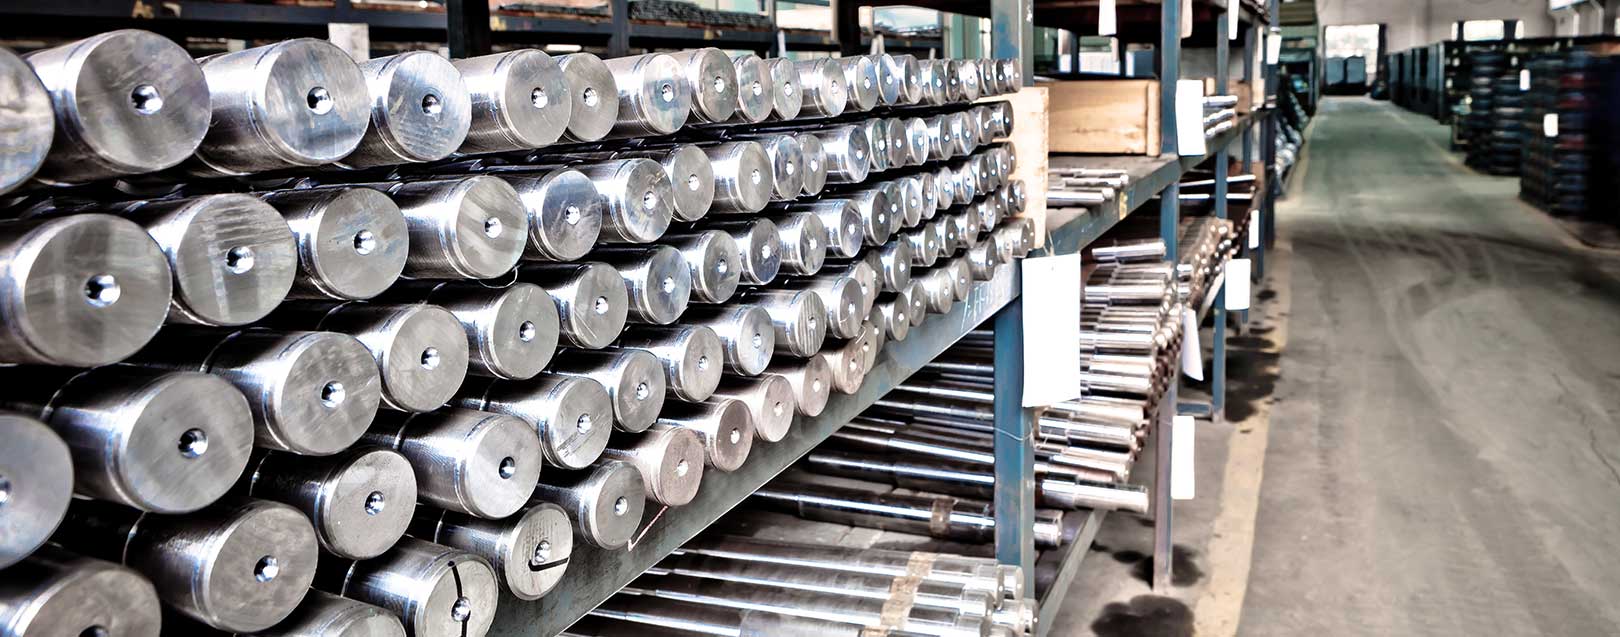 Govt sets up joint task force to ramp up steel demand